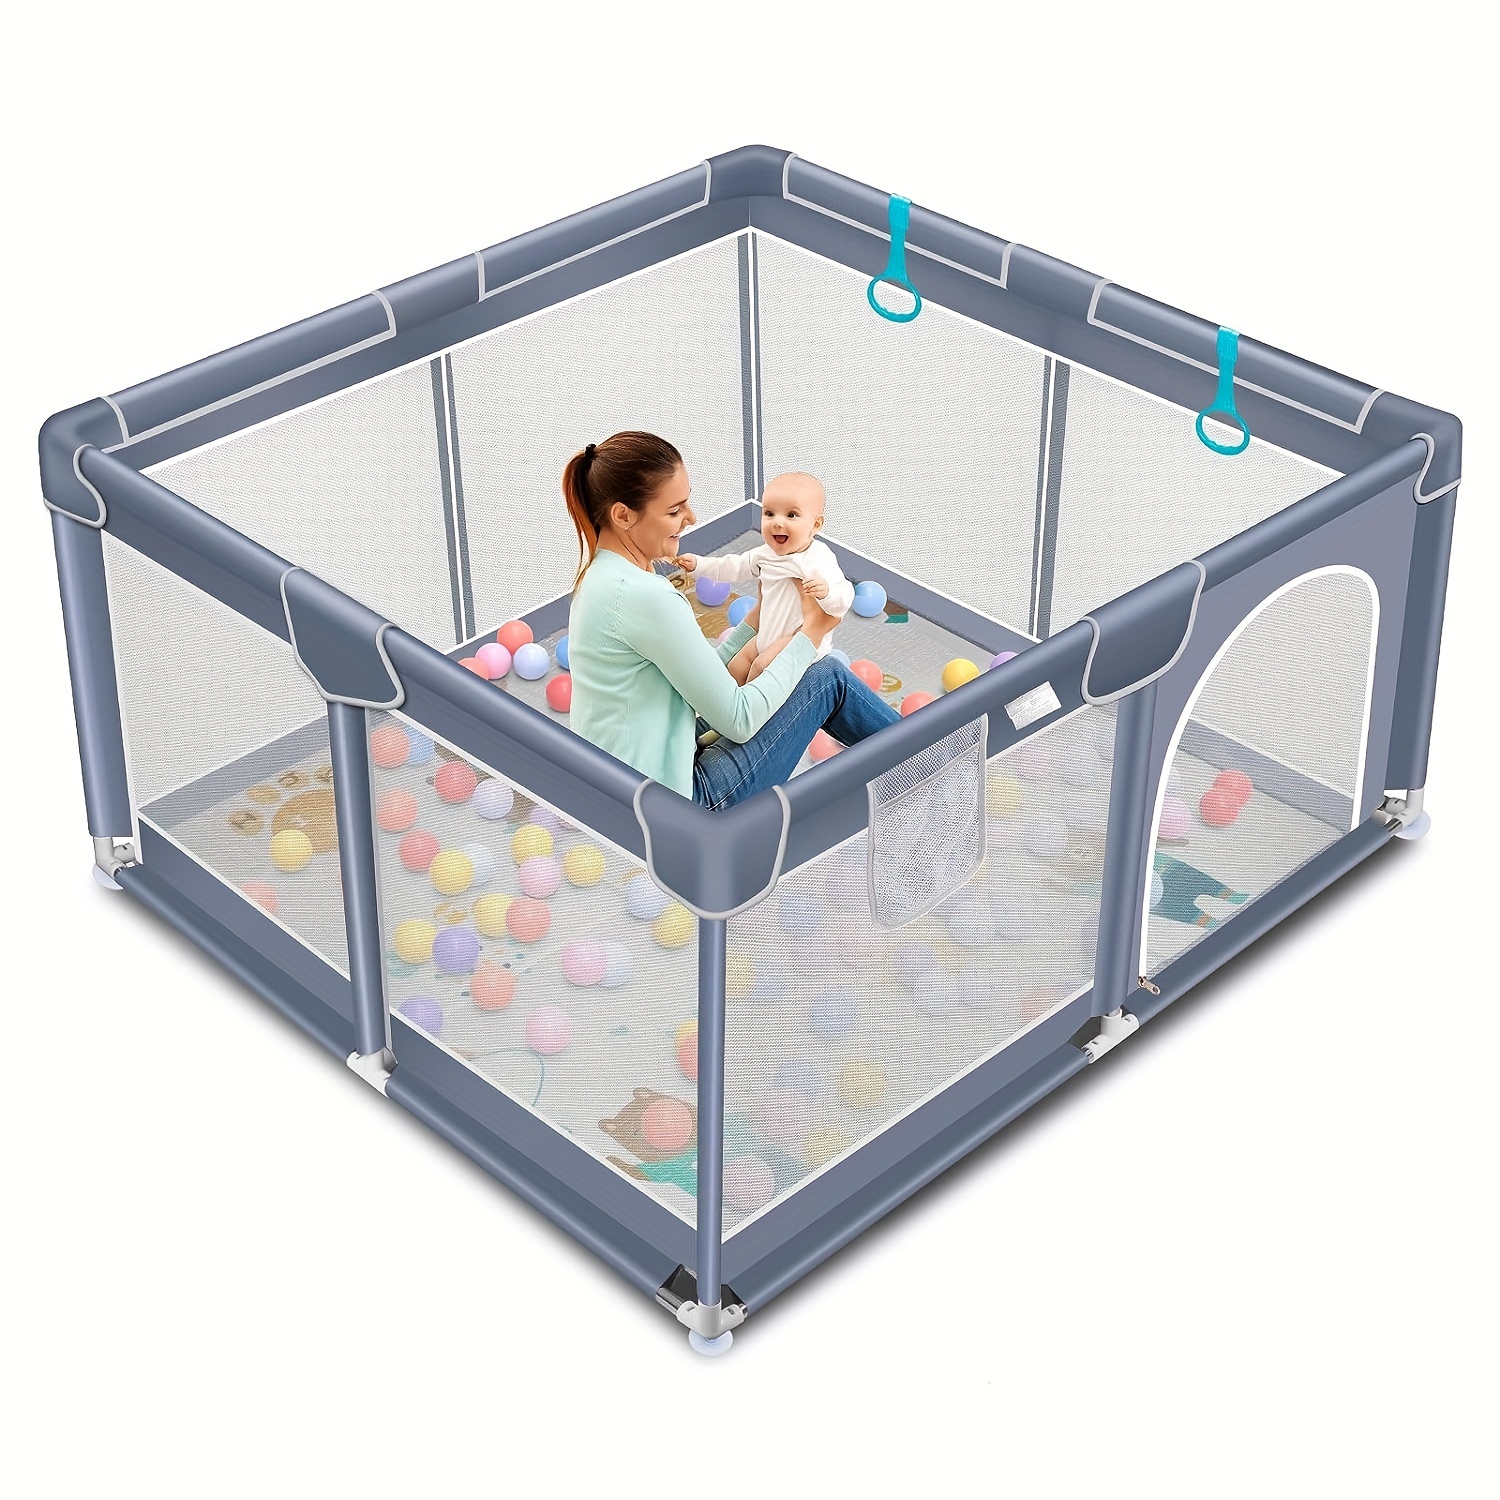 

Baby Playpen, Extra Large Playard, Indoor & Outdoor Kids Activity Center With Anti-slip Base, Sturdy Safety Play Yard With Breathable Mesh, Kid's Fence For Toddlers